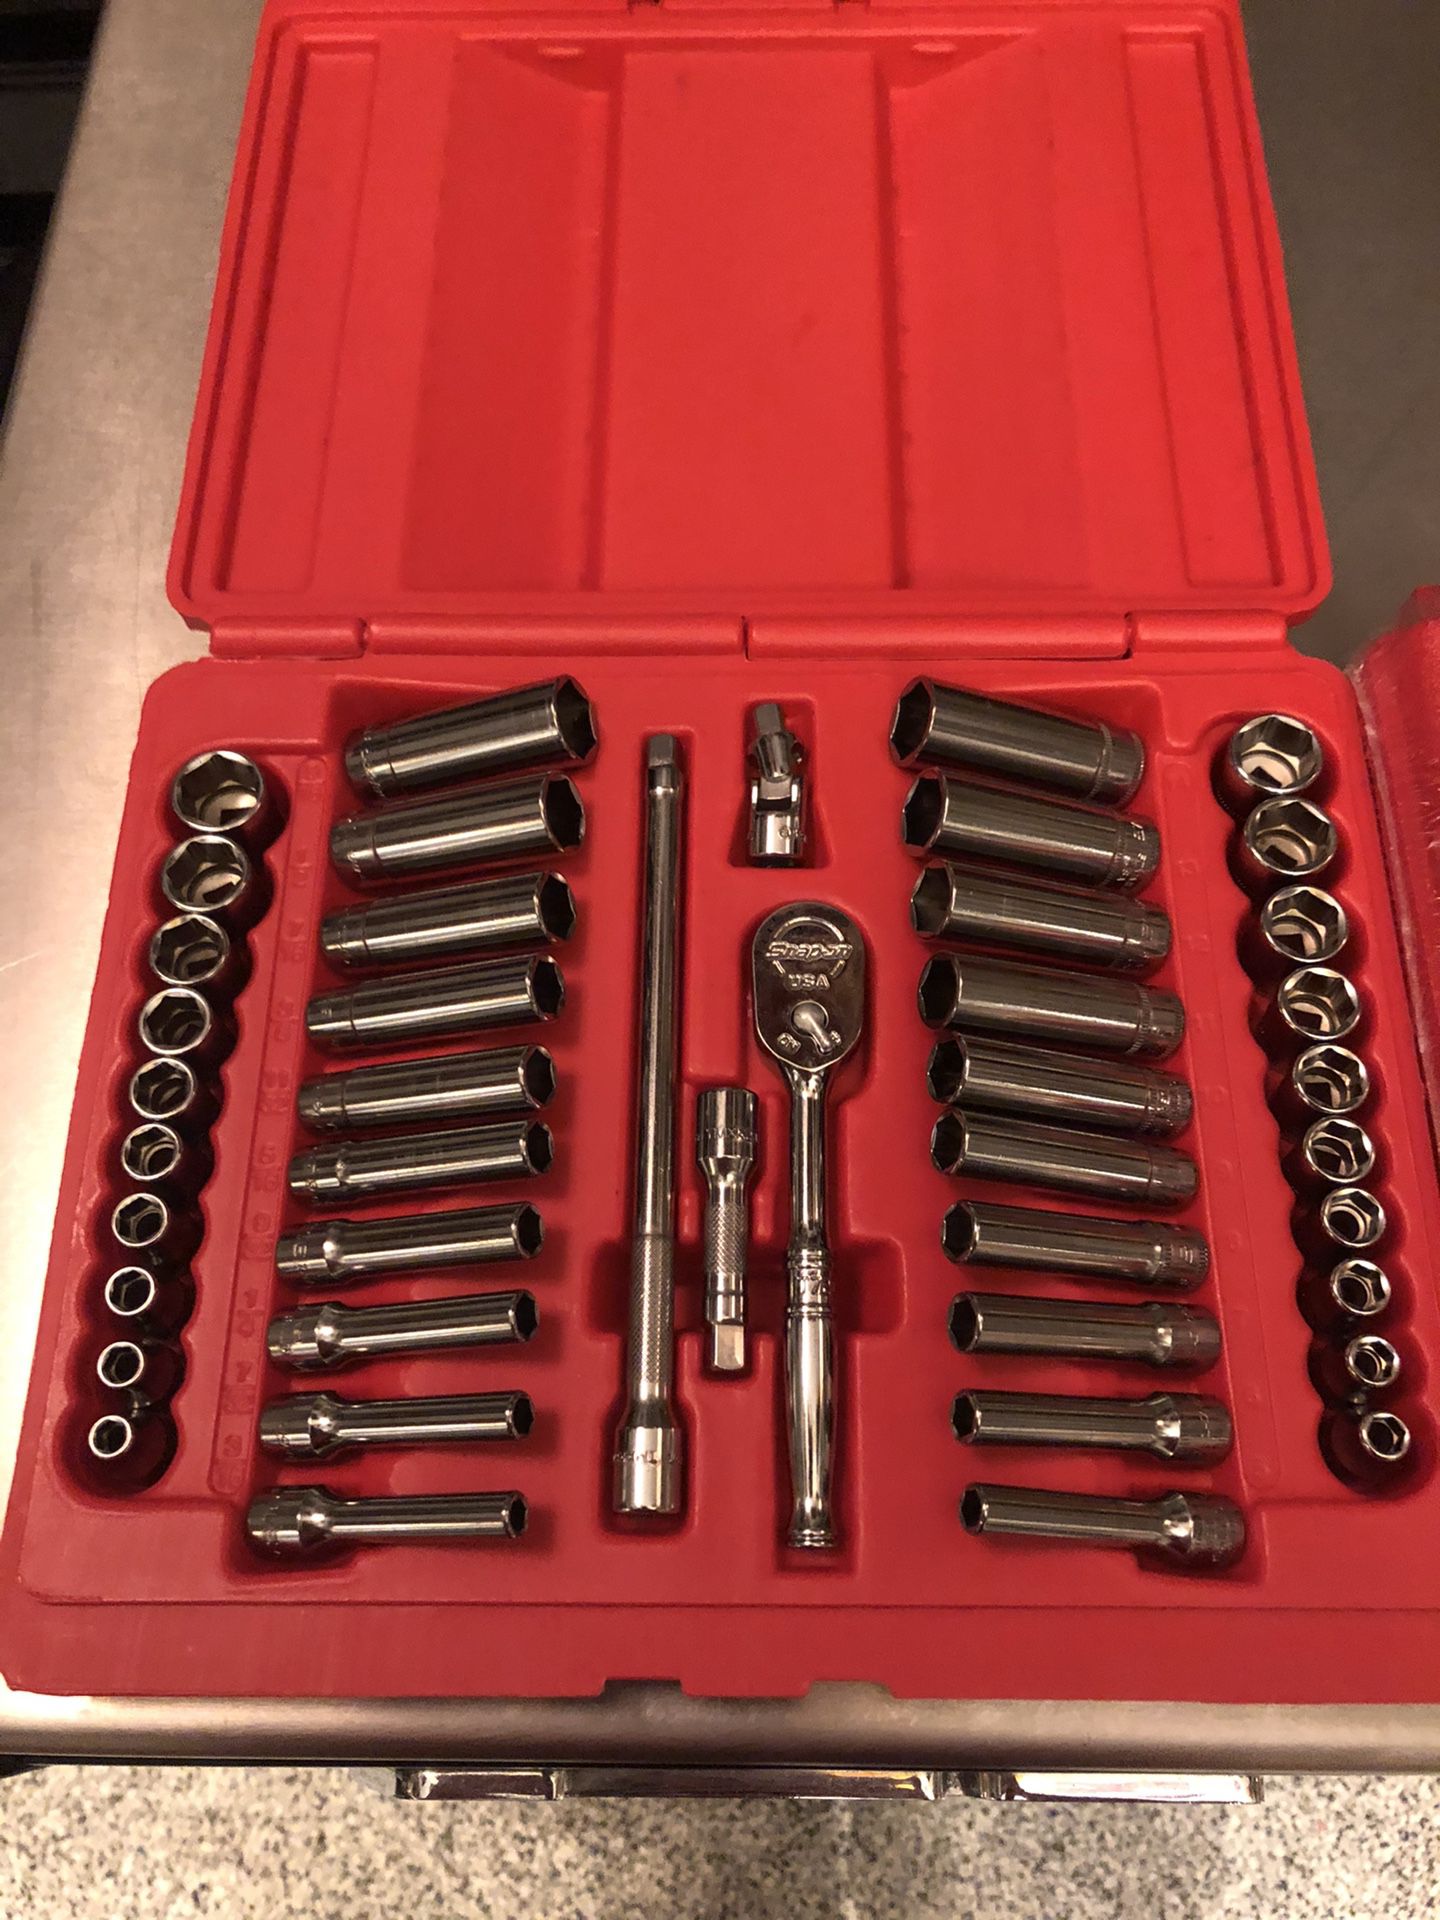 Snap on. Brand new 1/4” drive 44pc deep shallow metric sae general service set $375 firm